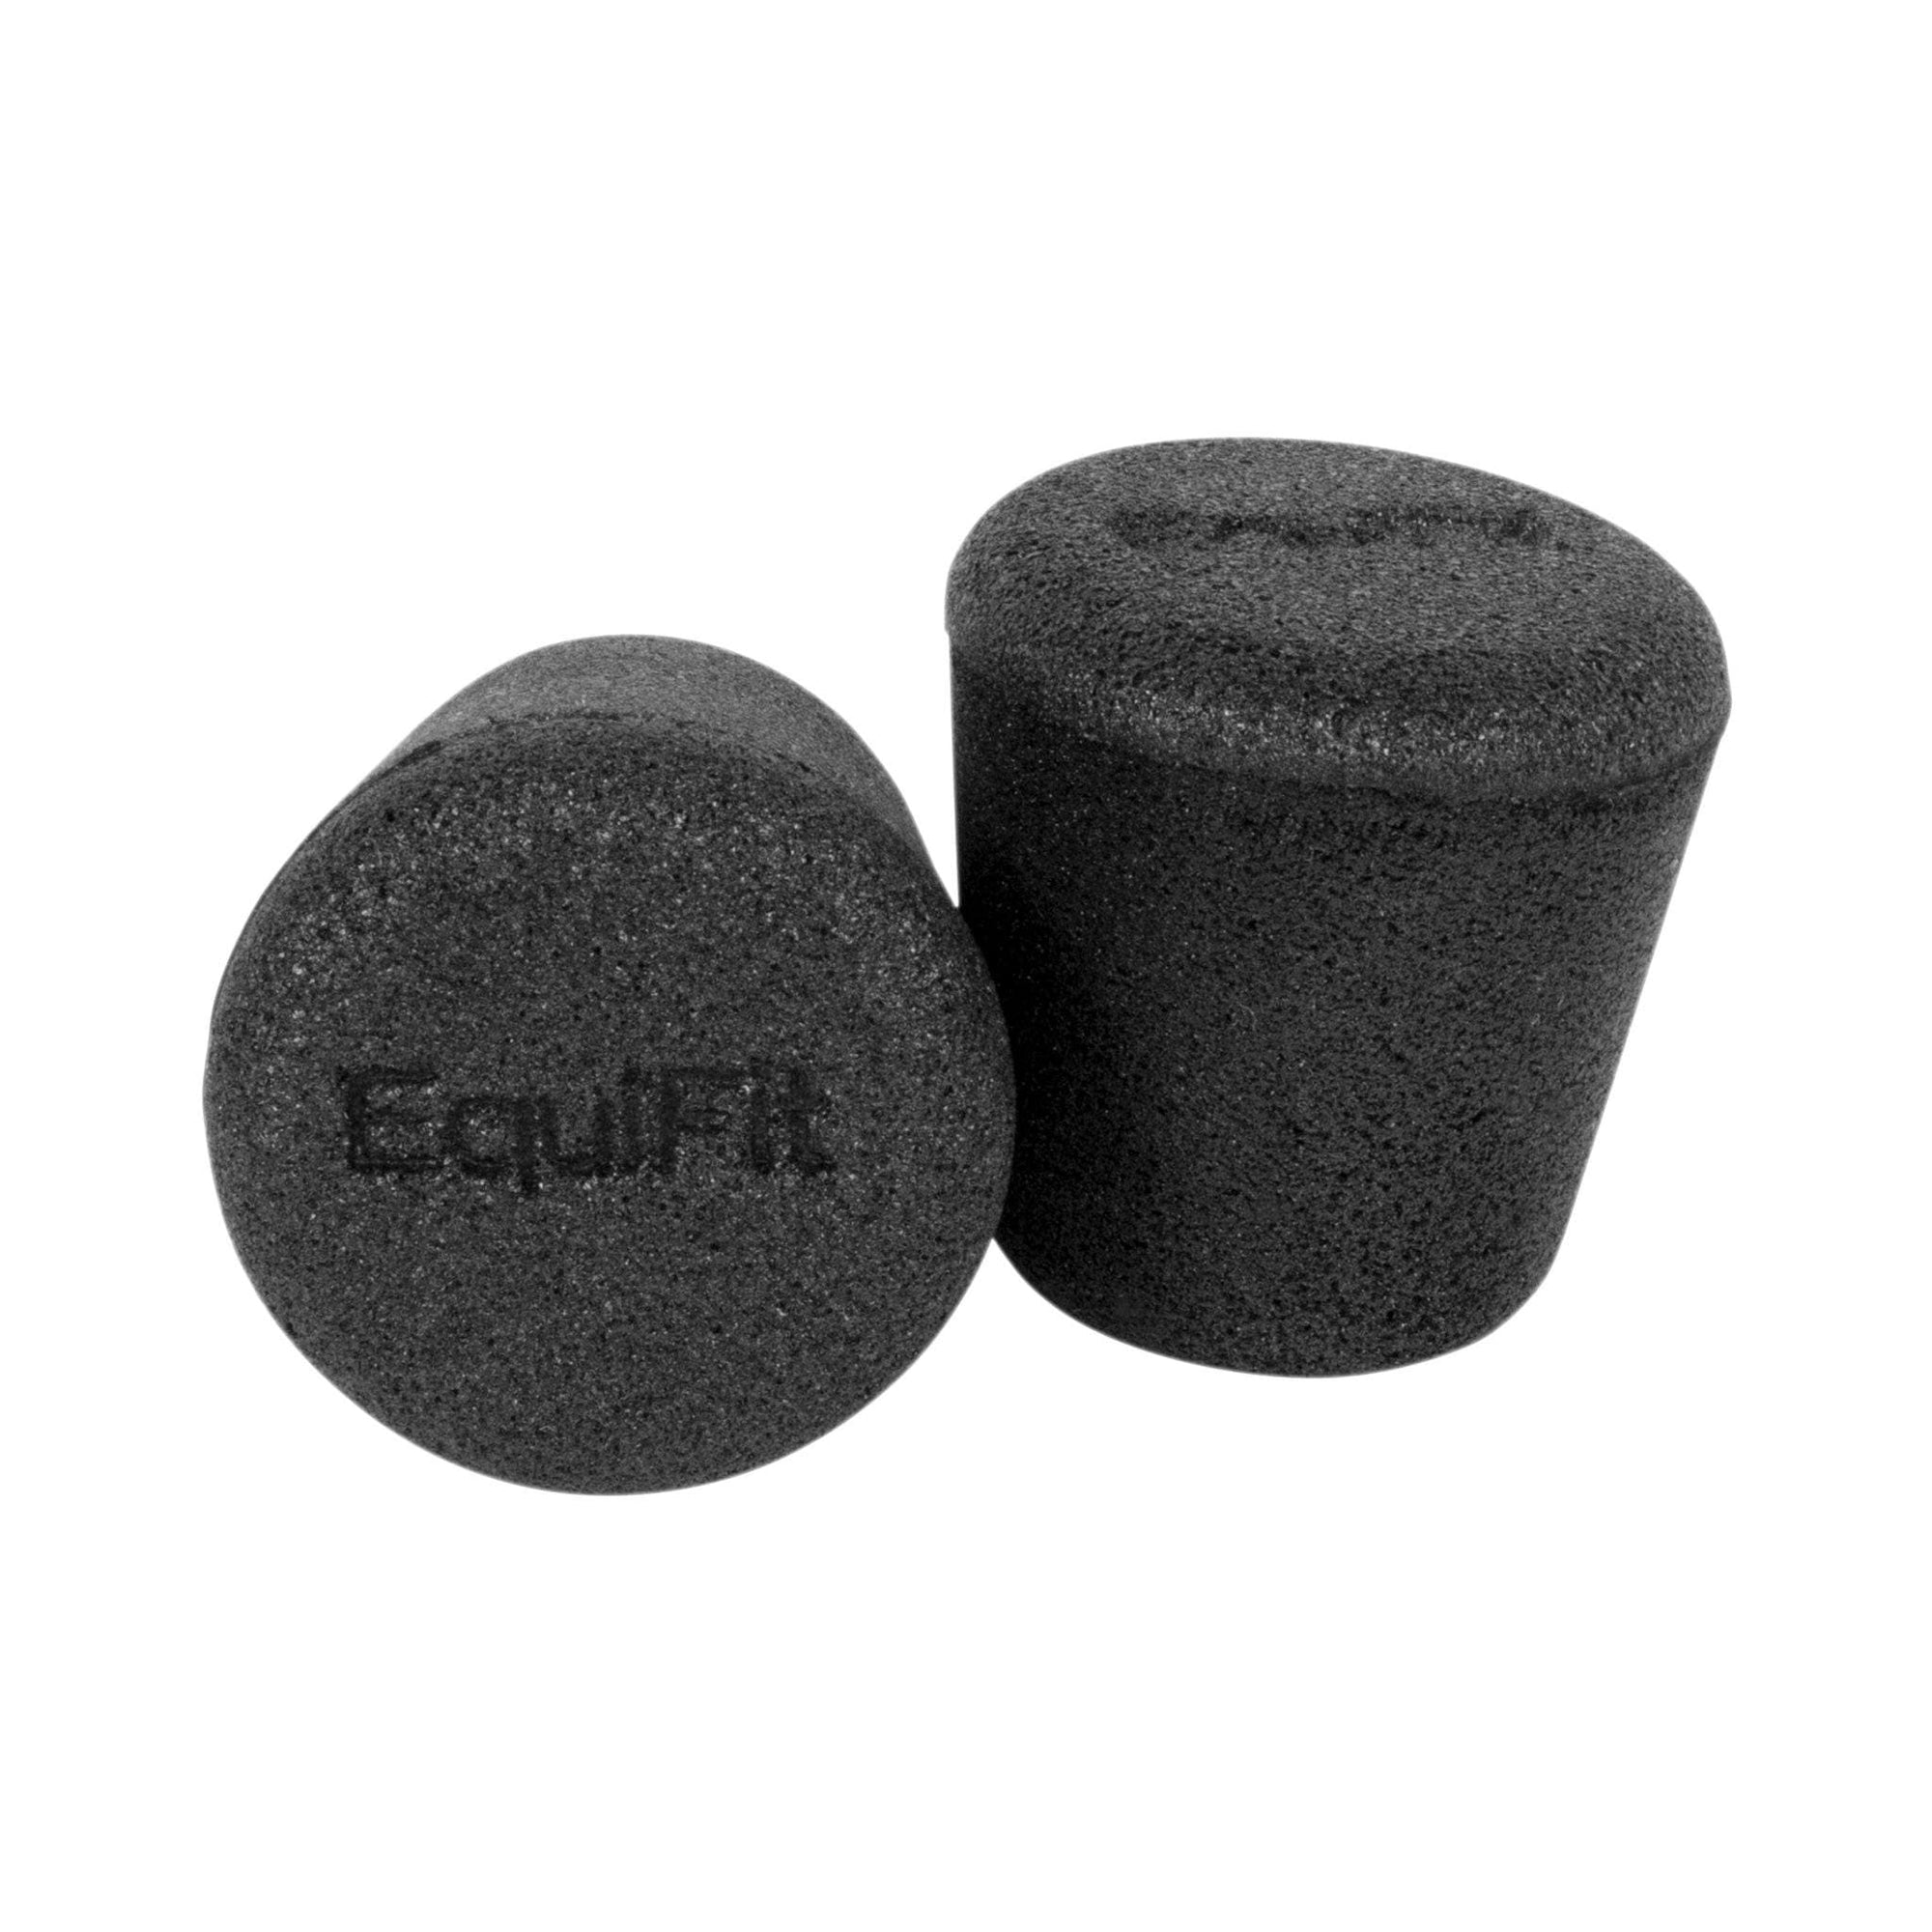 SilentFit Ear Plugs have A unique anatomical design and patented antimicrobial lining to ensure our ear plugs are as comfortable as they are functional